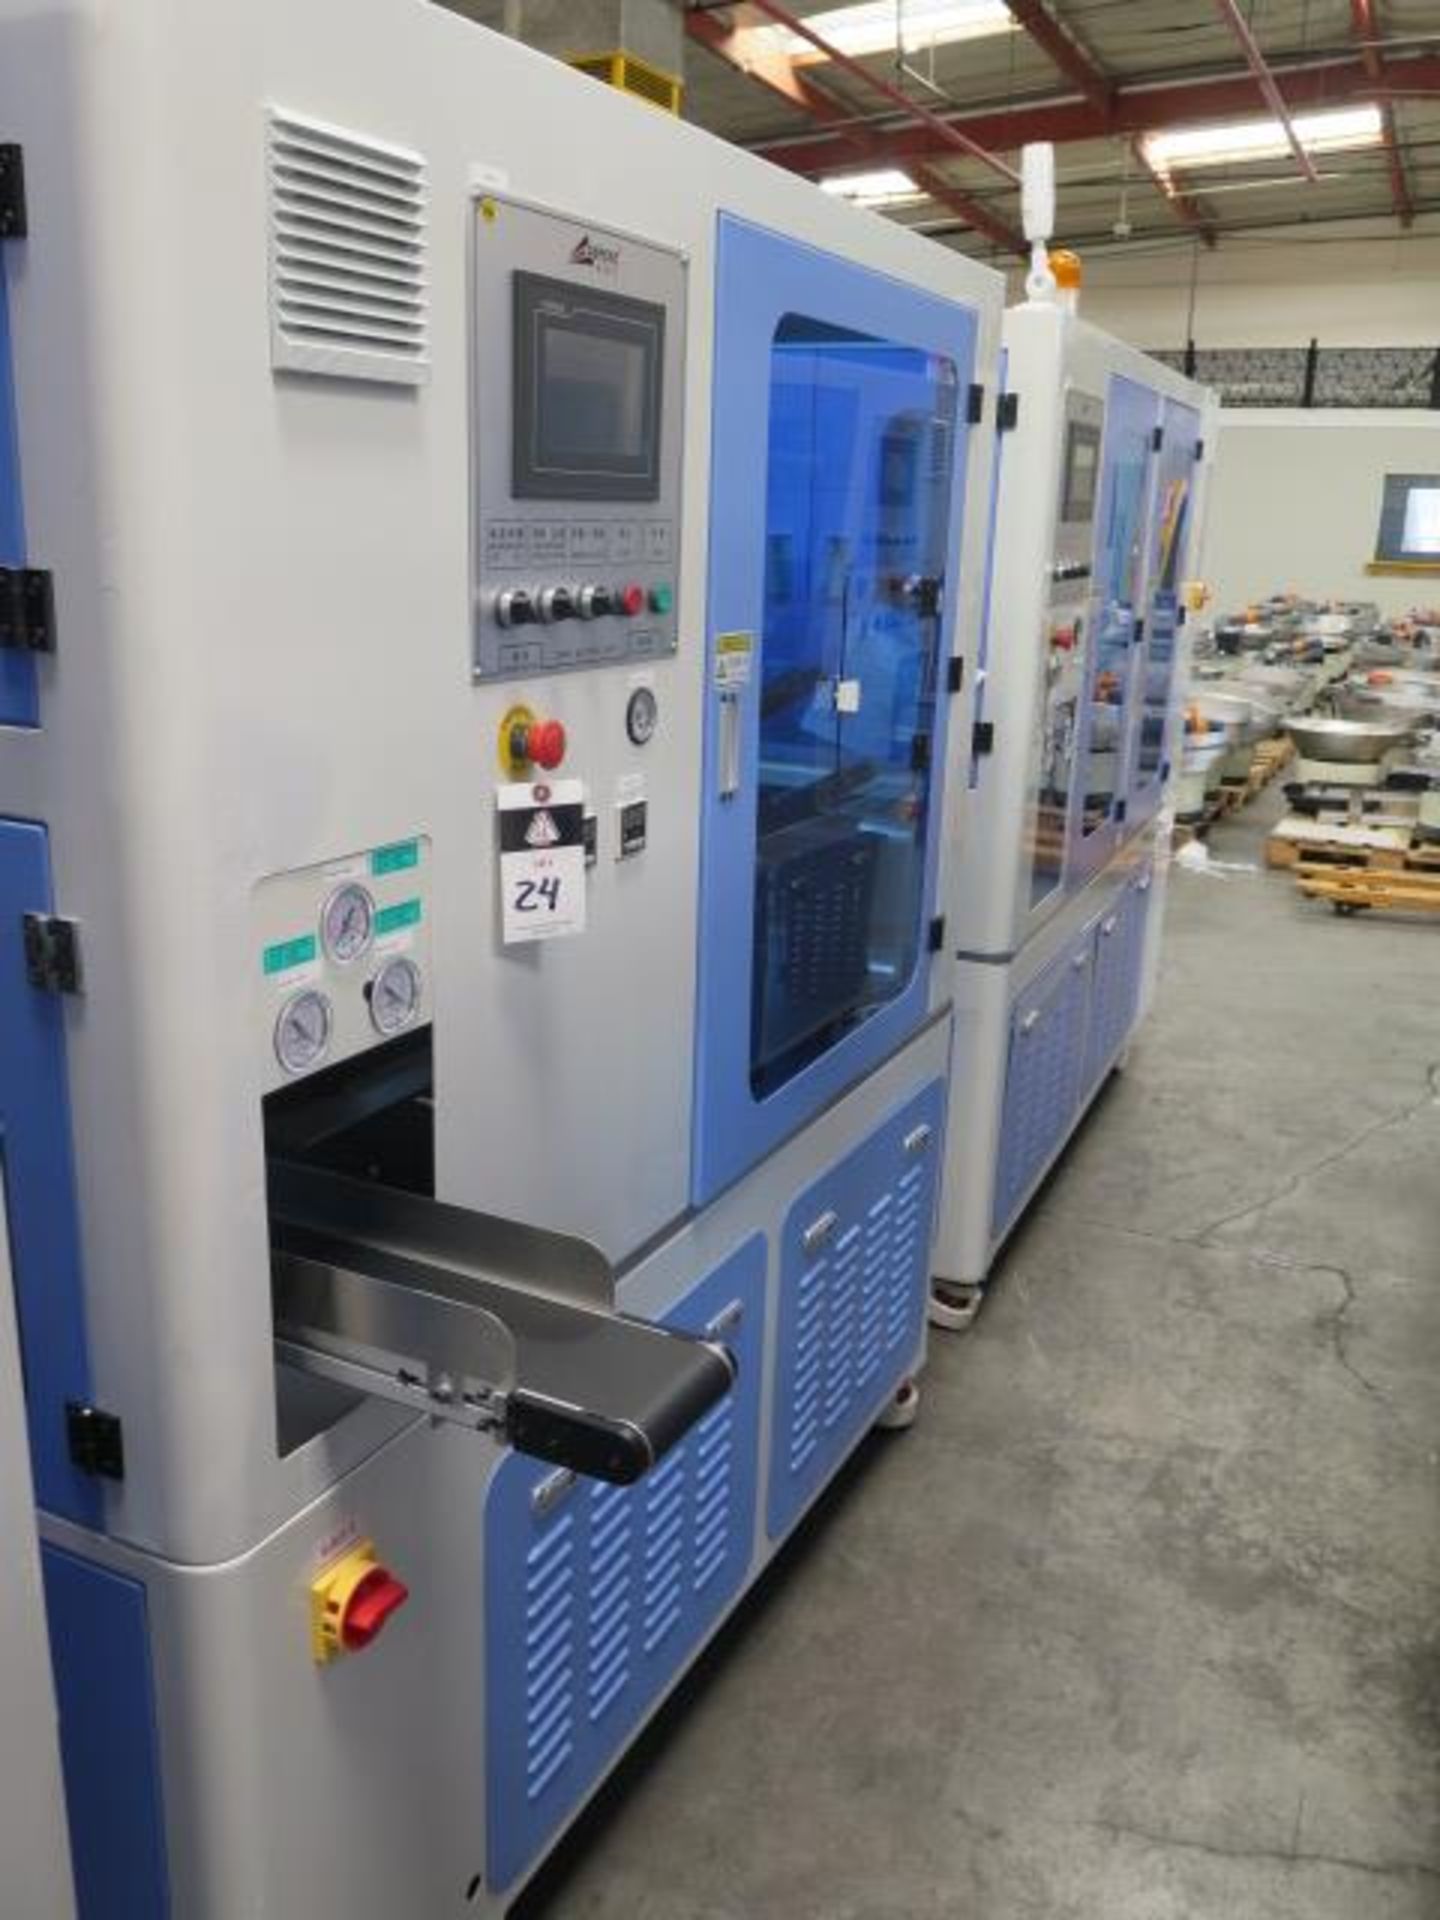 2/2021 Gereke mdl. GRK-TWO1 Cassette Assembly and Packaging Line s/n GRK20210227064, SOLD AS IS